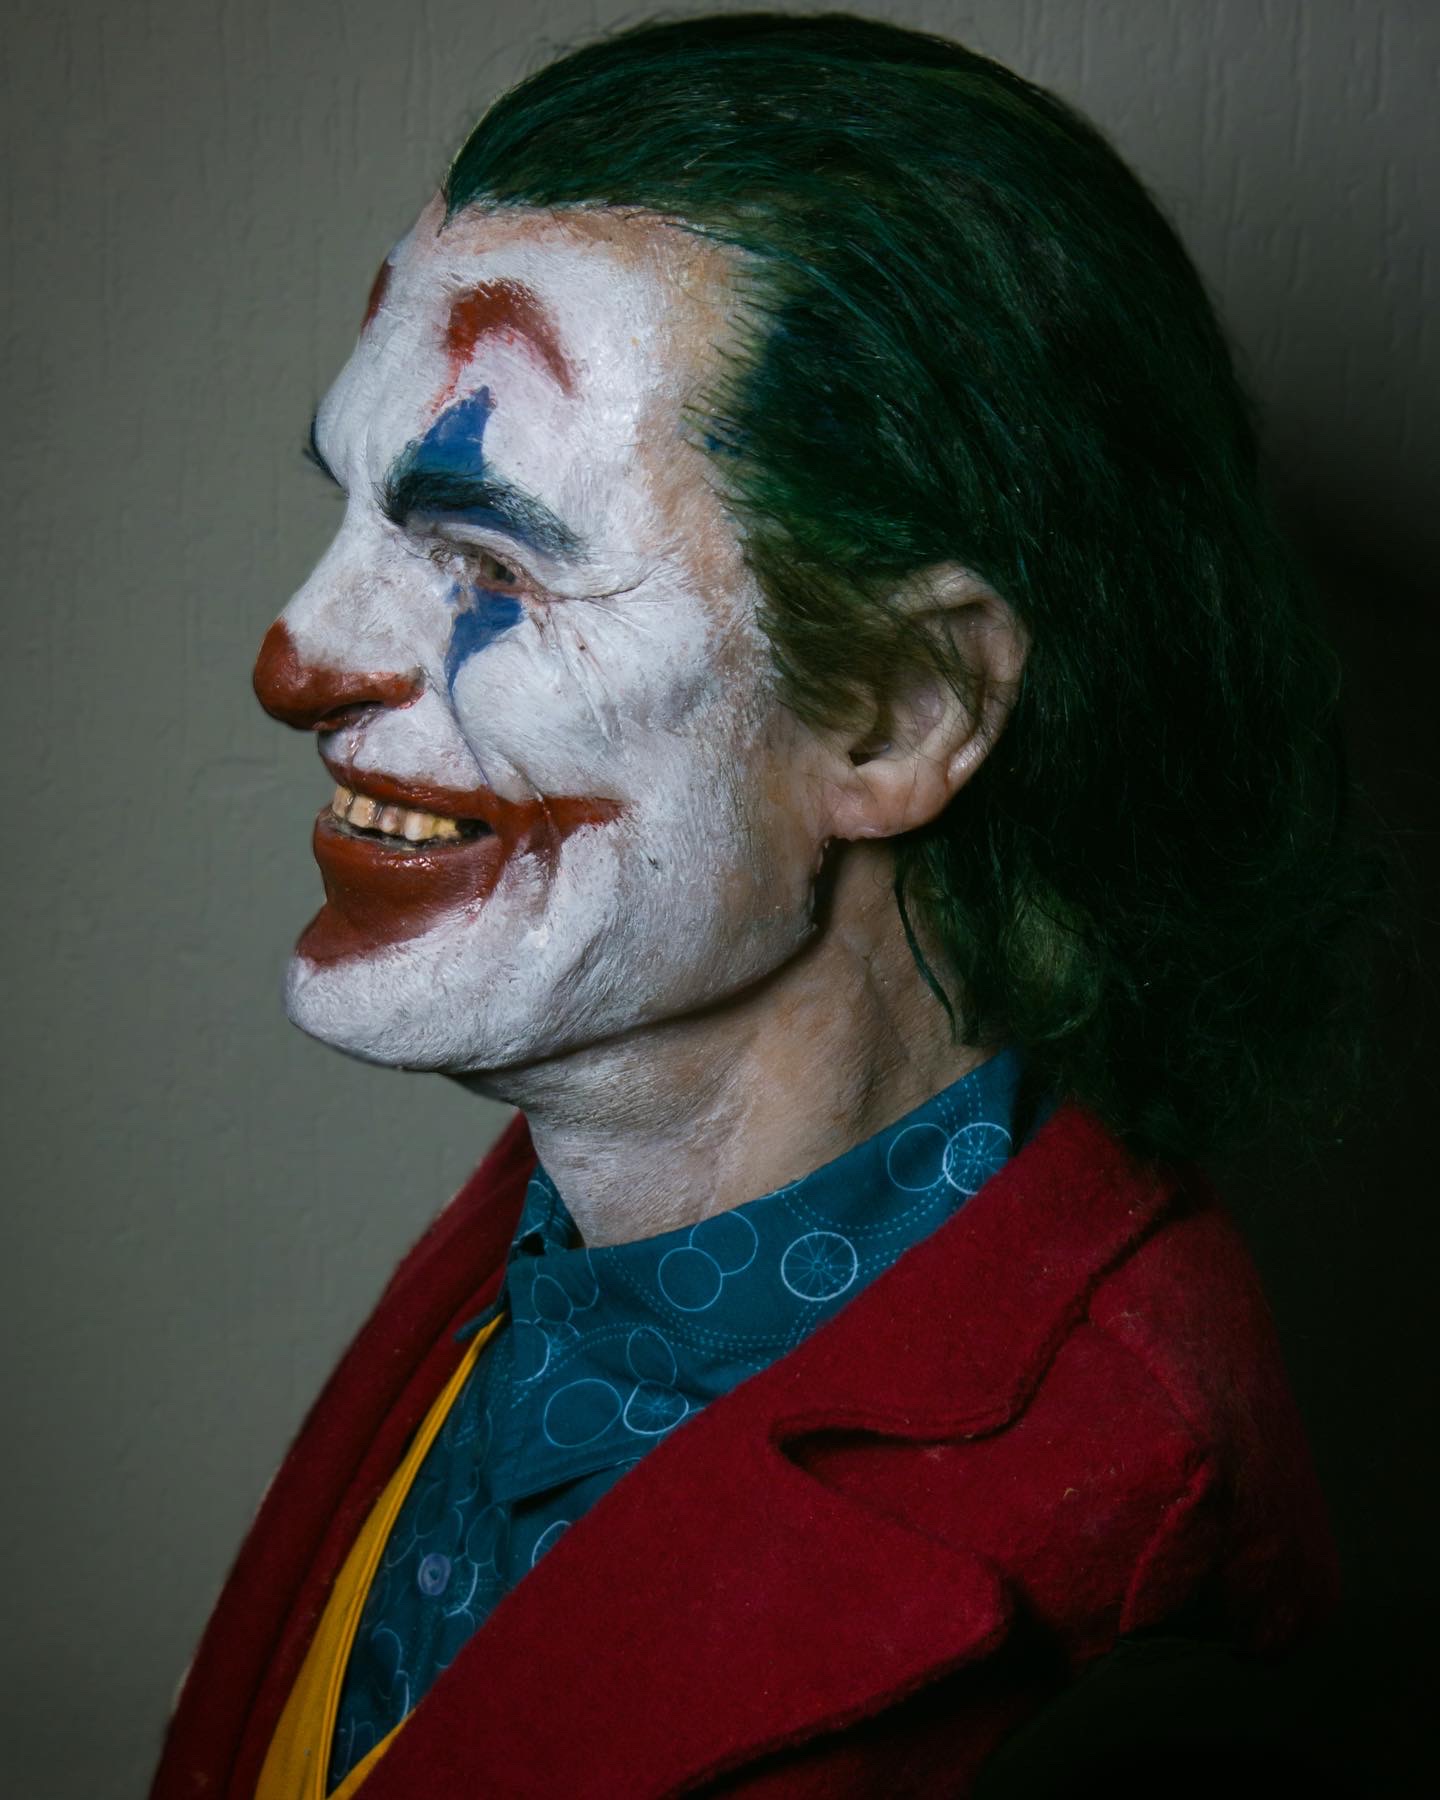 Joker (2019) FINISHED - Page 2 - RPF Costume and Prop ...